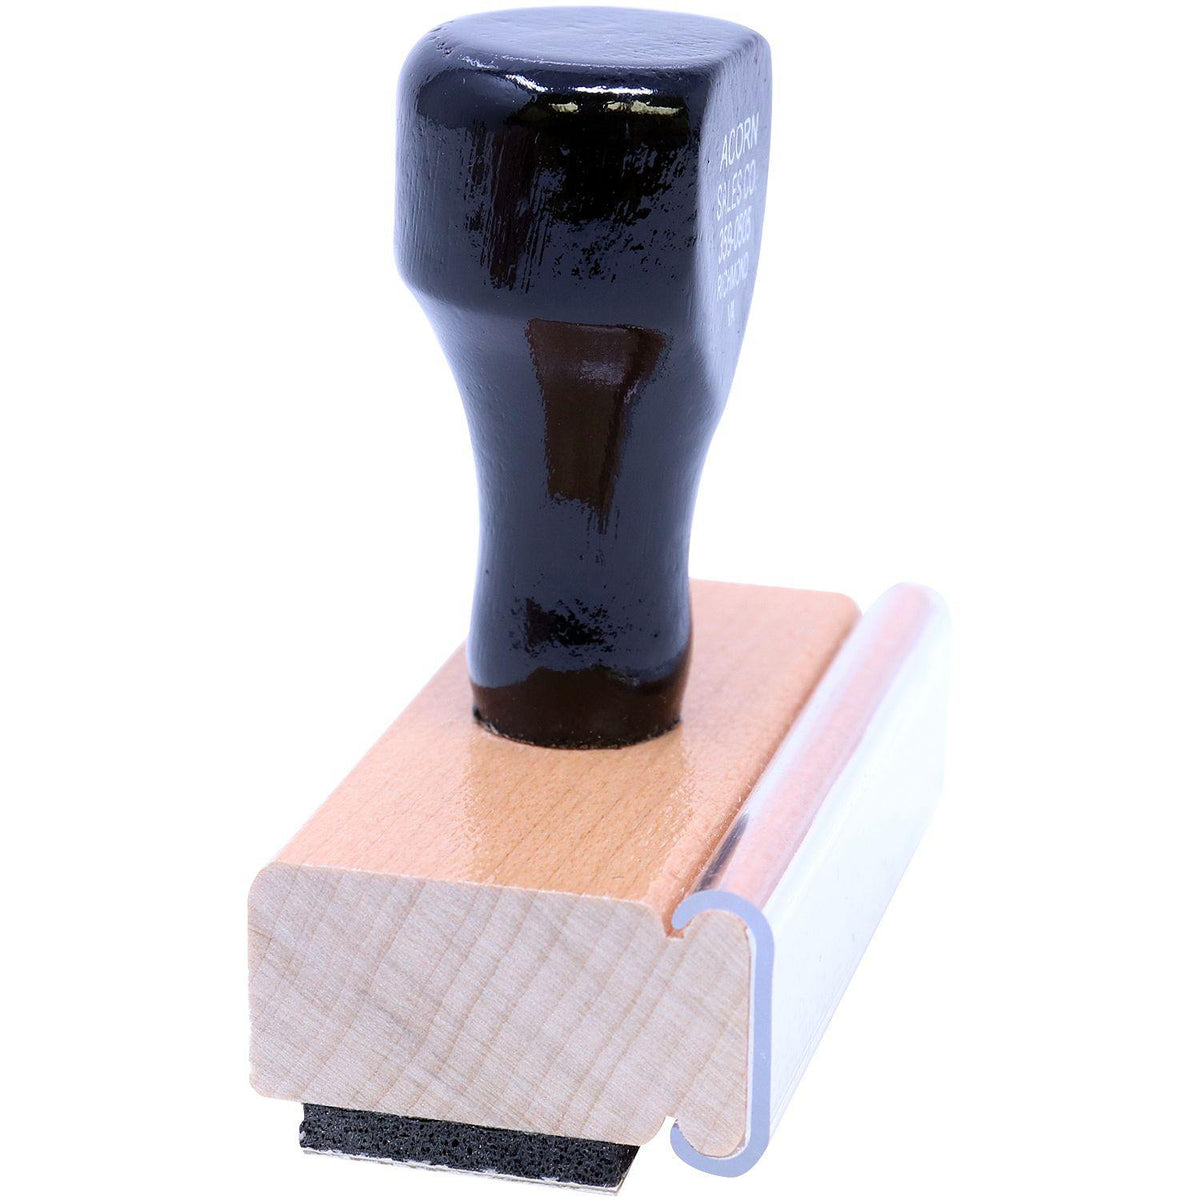 Side View of Will Legal Rubber Stamp at an Angle